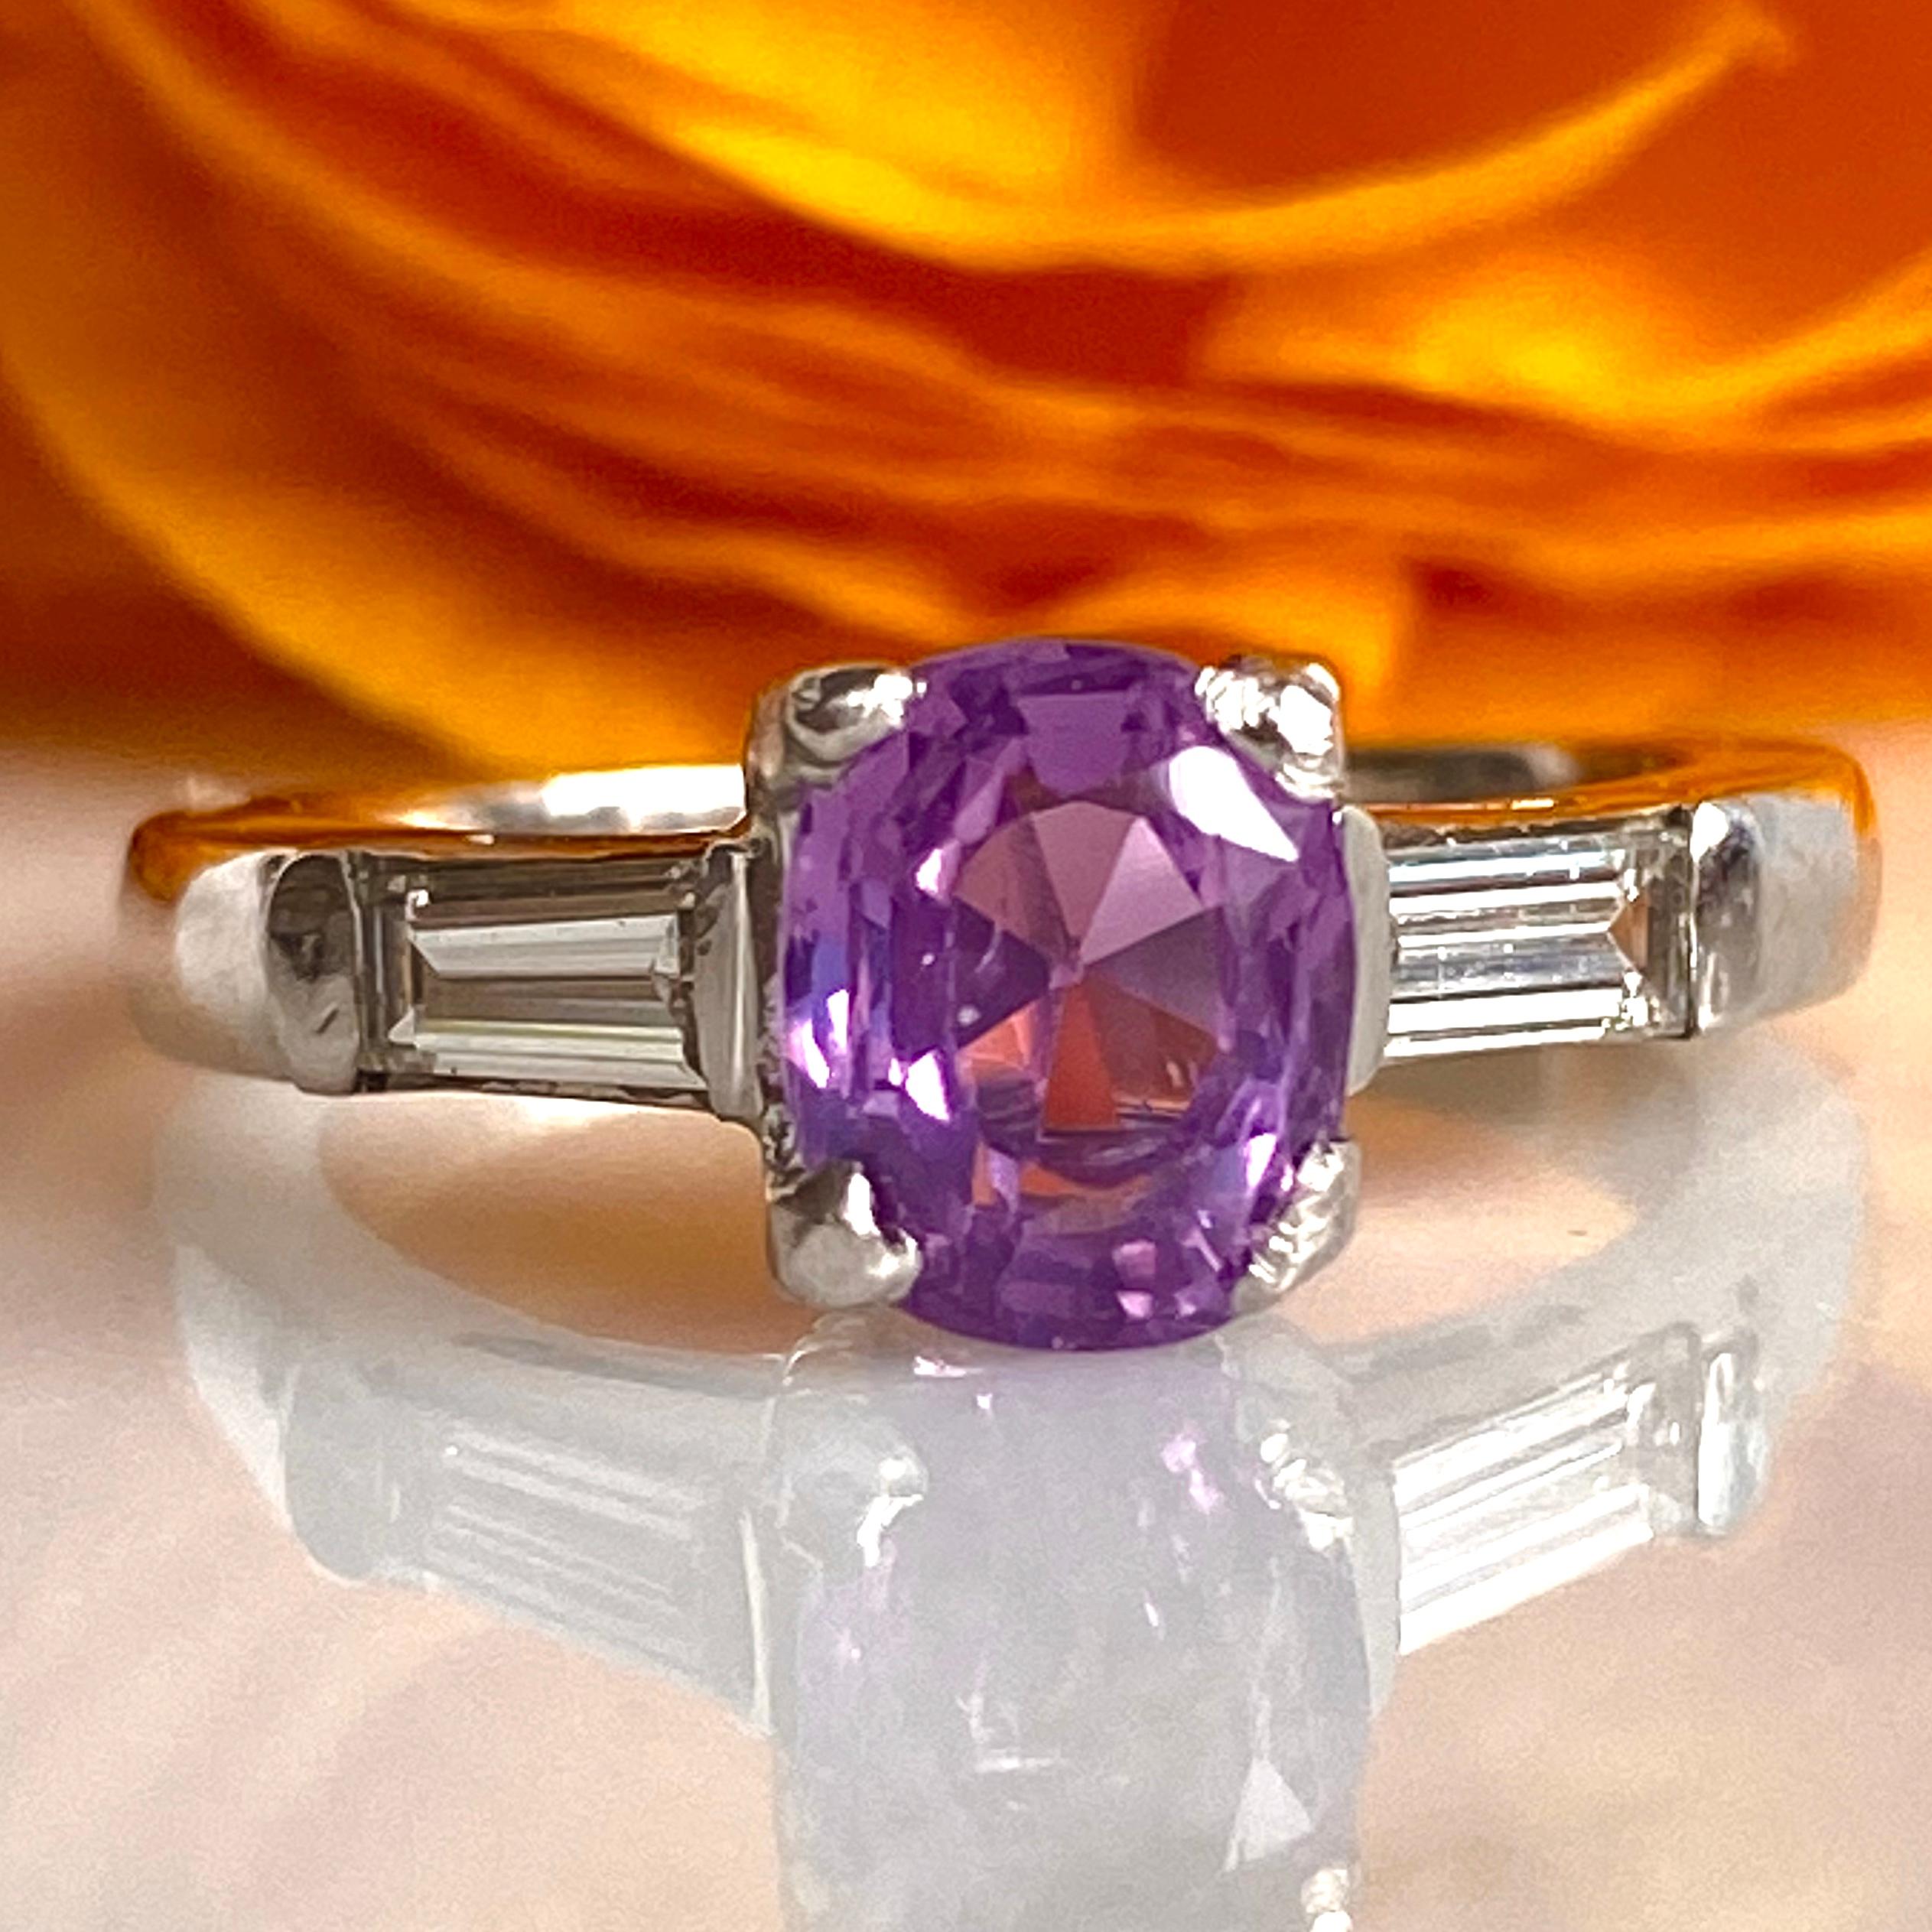 Details:
Fabulous alternative engagement or wedding ring! Stunning Art Deco period pink violet sapphire and diamond platinum ring. This one has so much life in the stone! It glows! Would make lovely engagement or wedding ring, or a fabulous everyday